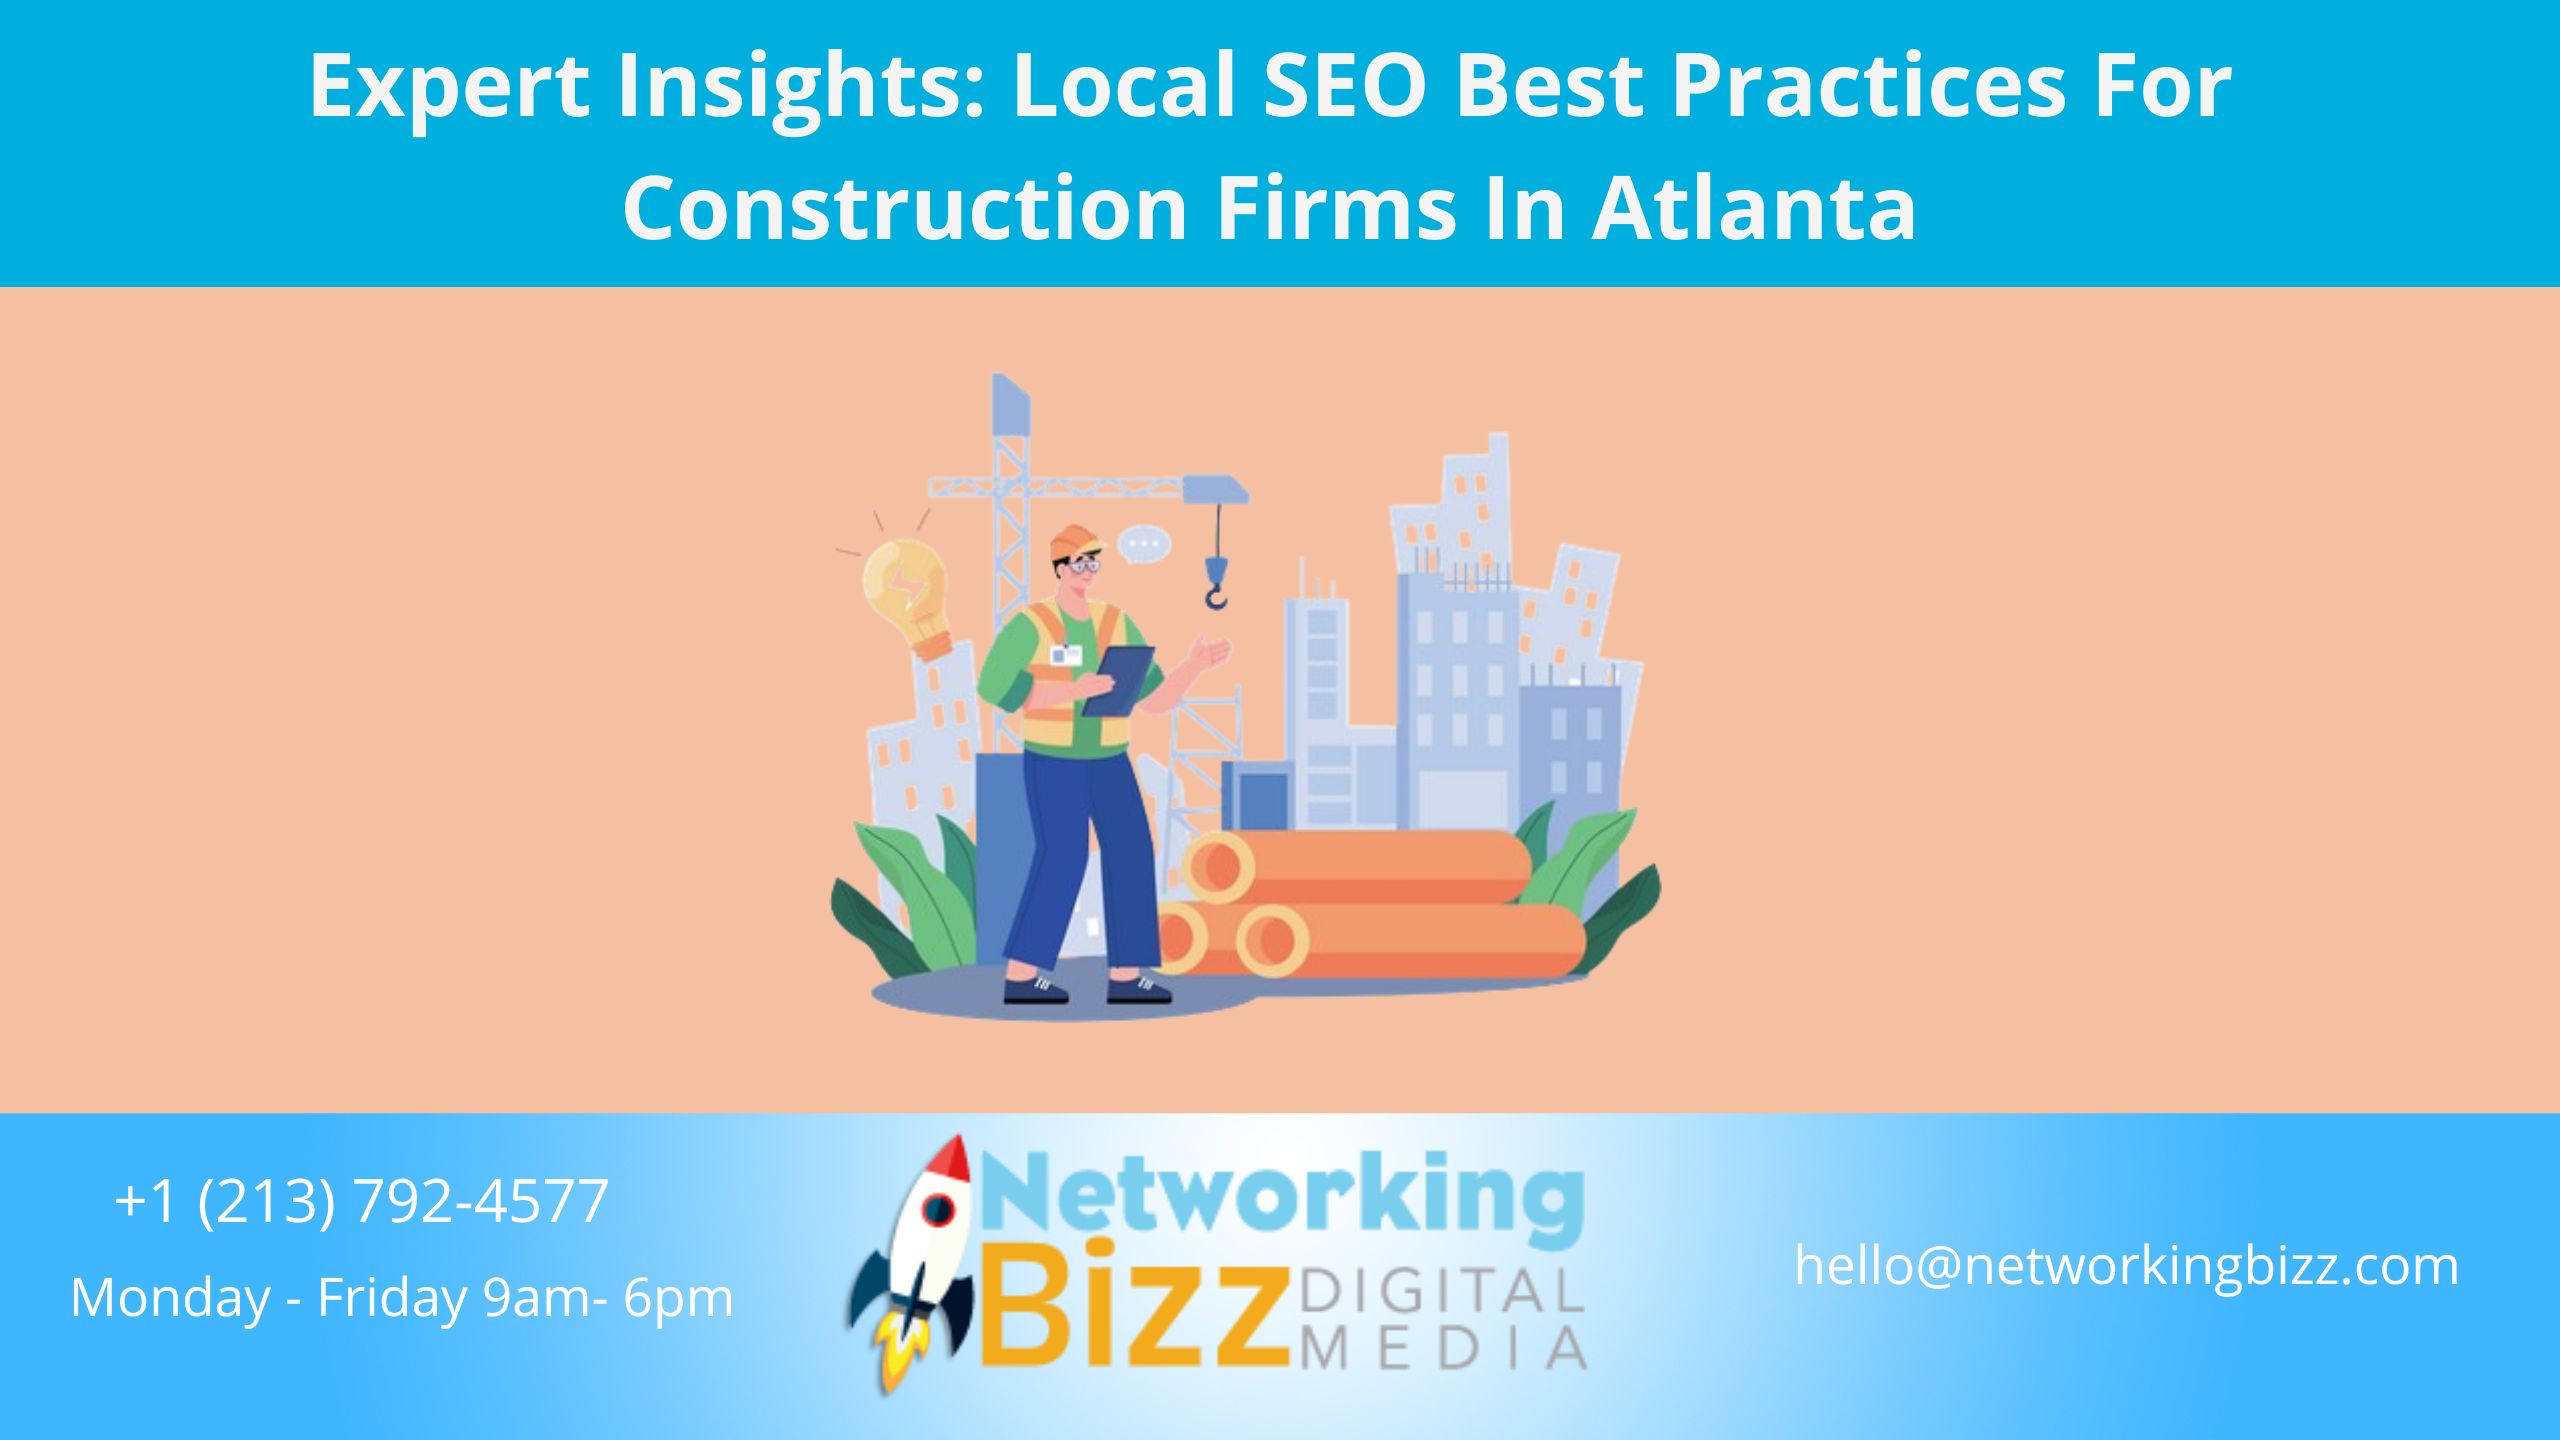 Expert Insights: Local SEO Best Practices For Construction Firms In Atlanta 